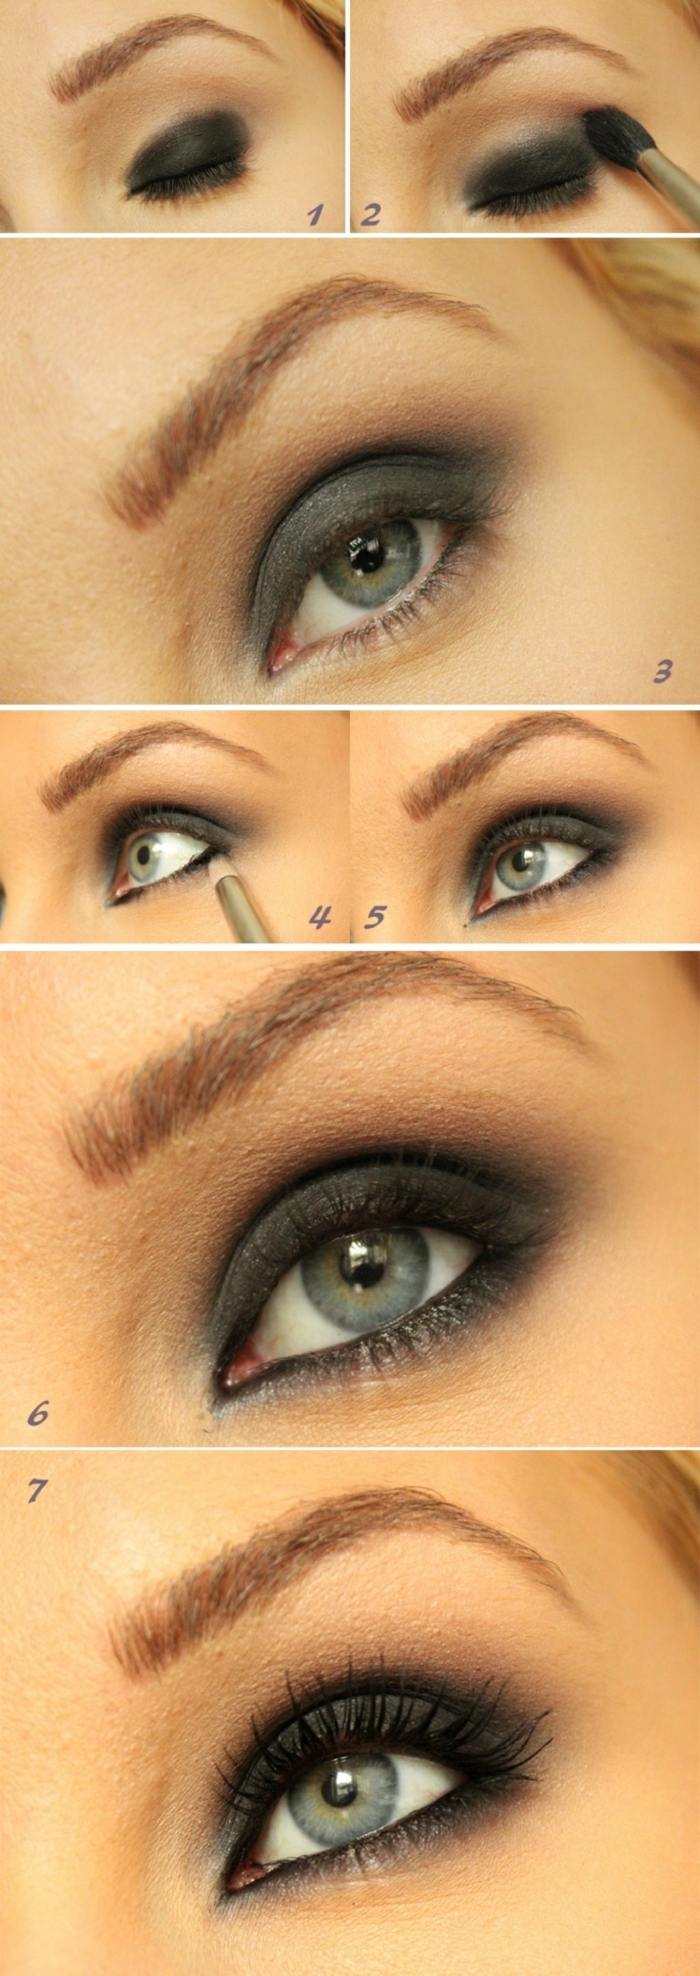 maquillage-yeux-vert-marron-maquillage-soirée-yeux-verts-étapes-resized